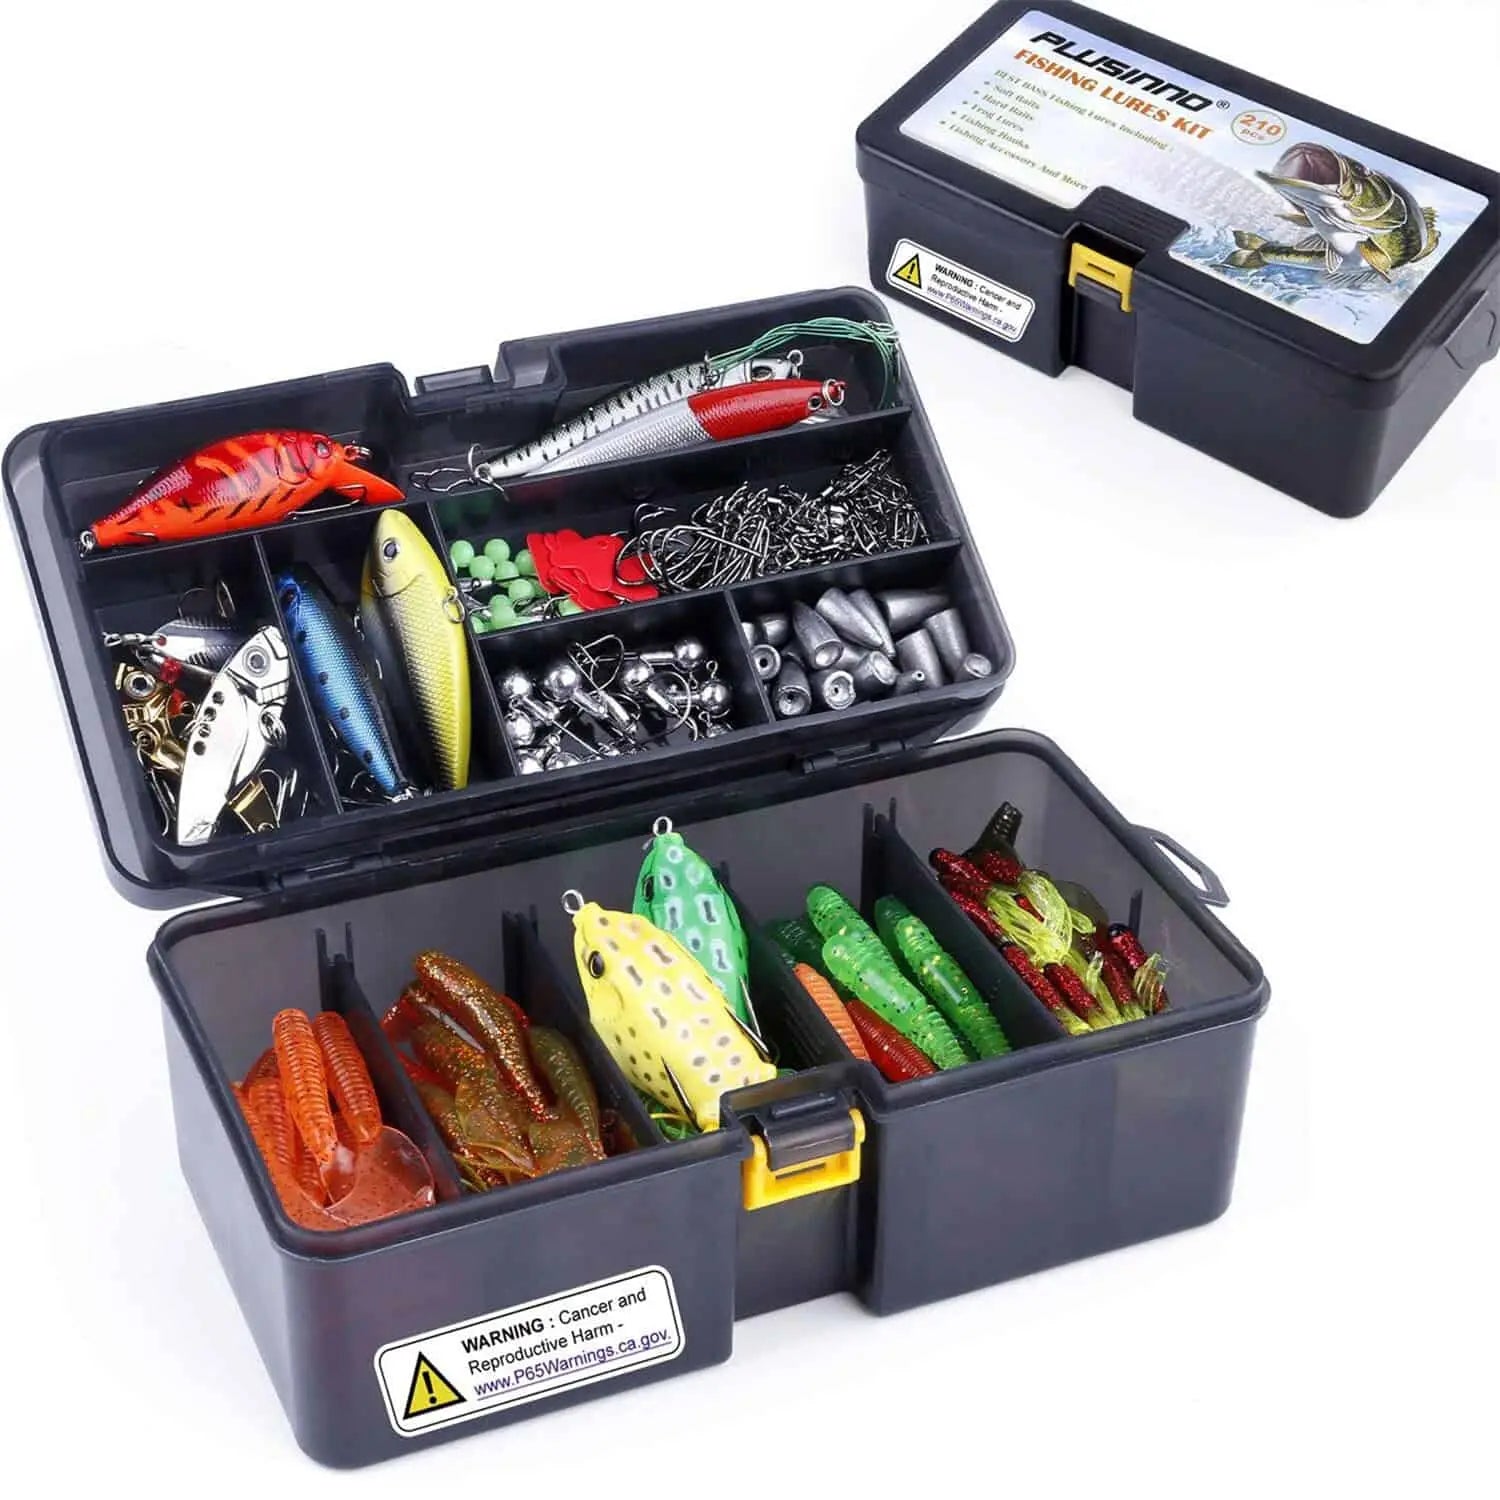 PLUSINNO Fishing Lures for 12 Rigs, Fishing Tackle Box with Tackle Included  Crankbaits, Spoon, Hooks, Weights and More Fishing Accessories, 353 Pcs